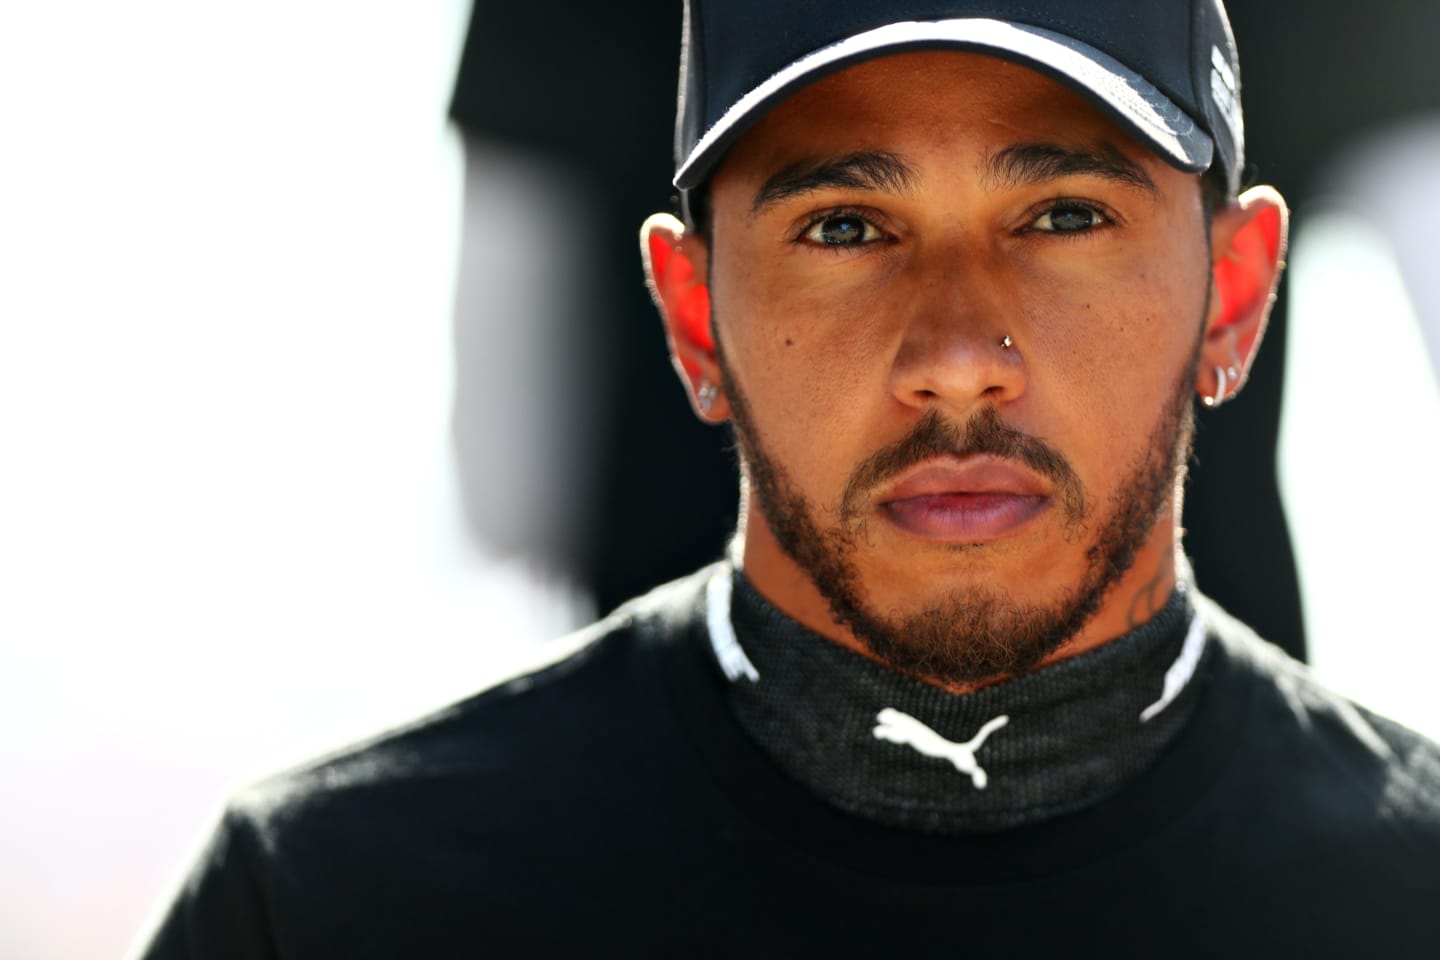 SOCHI, RUSSIA - SEPTEMBER 27: Lewis Hamilton of Great Britain and Mercedes GP looks on before the